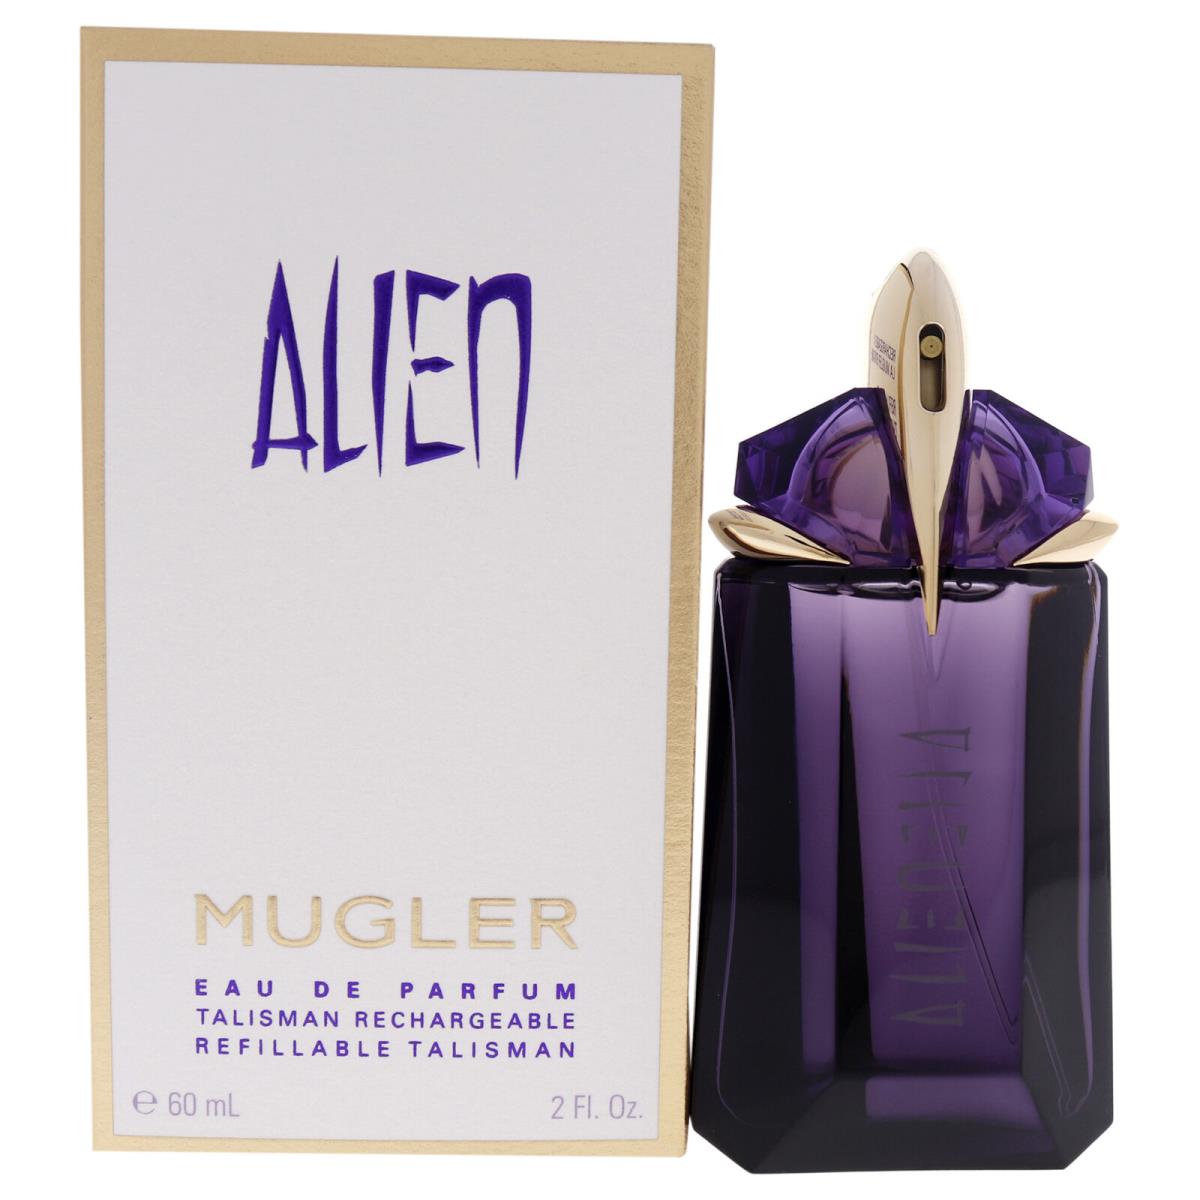 Alien by Thierry Mugler For Women - 2 oz Edp Spray Refillable